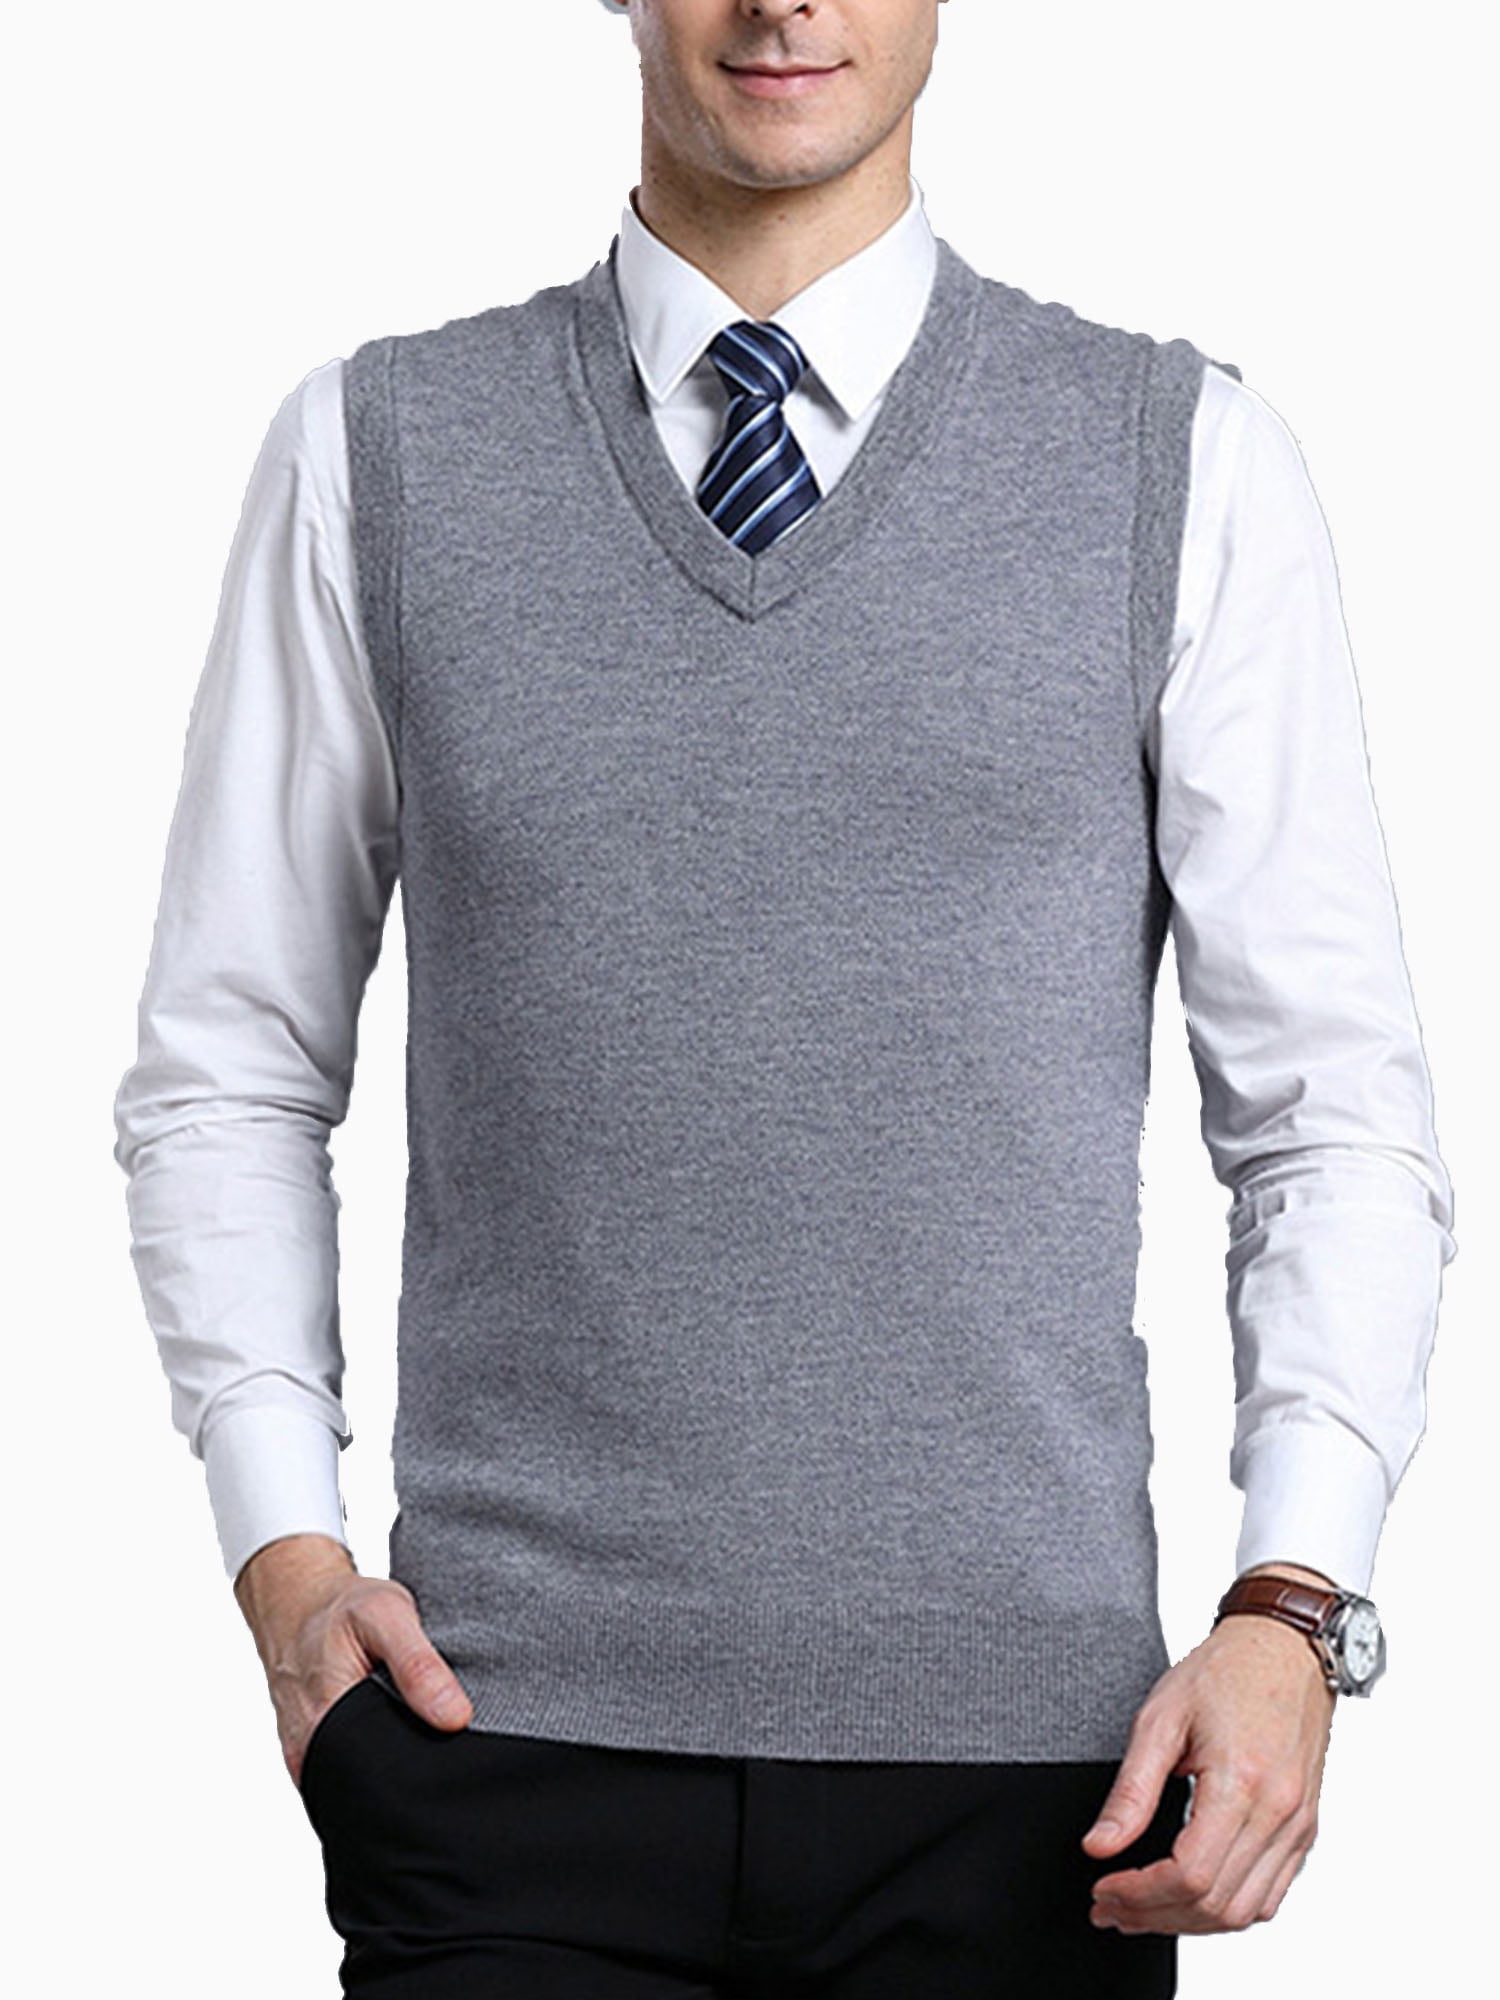 Classic Solid V Neck Sweater Vest for Men Casual Relax Fit Knit Sleeveless  Pullover Autumn Winter Business Golf Top - Walmart.com